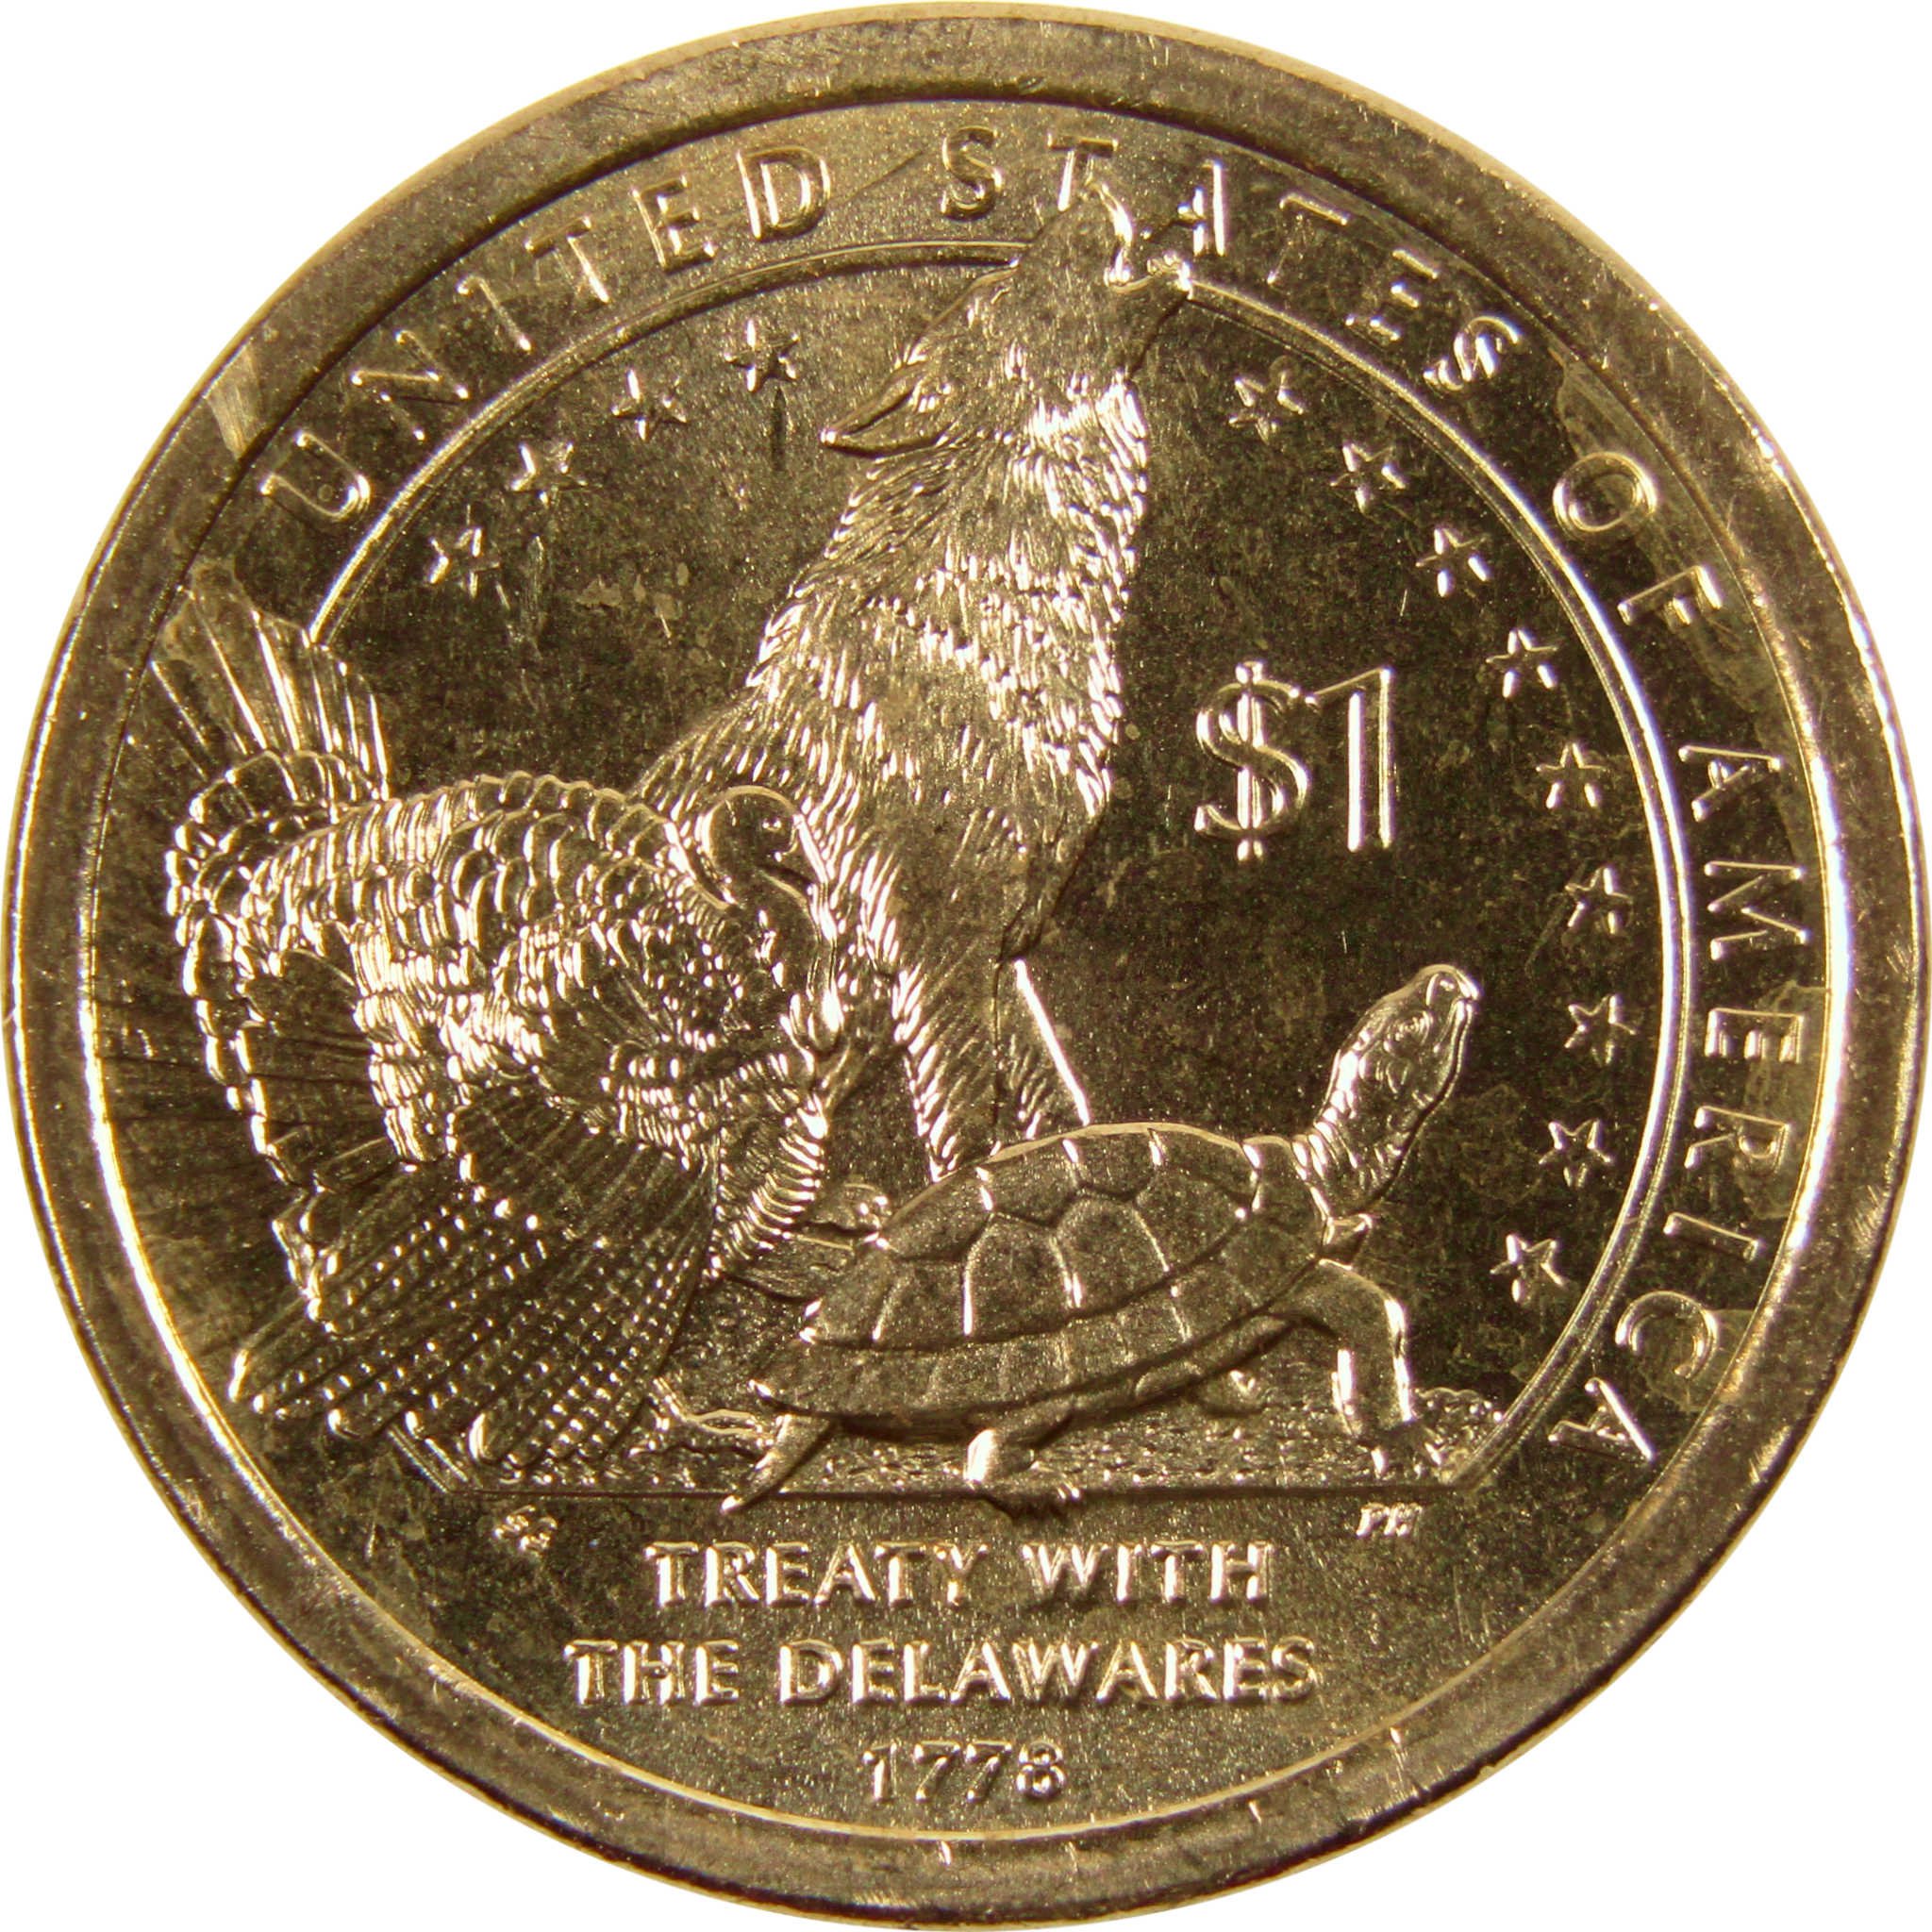 2013 D Treaty with the Delawares Native American Dollar Uncirculated